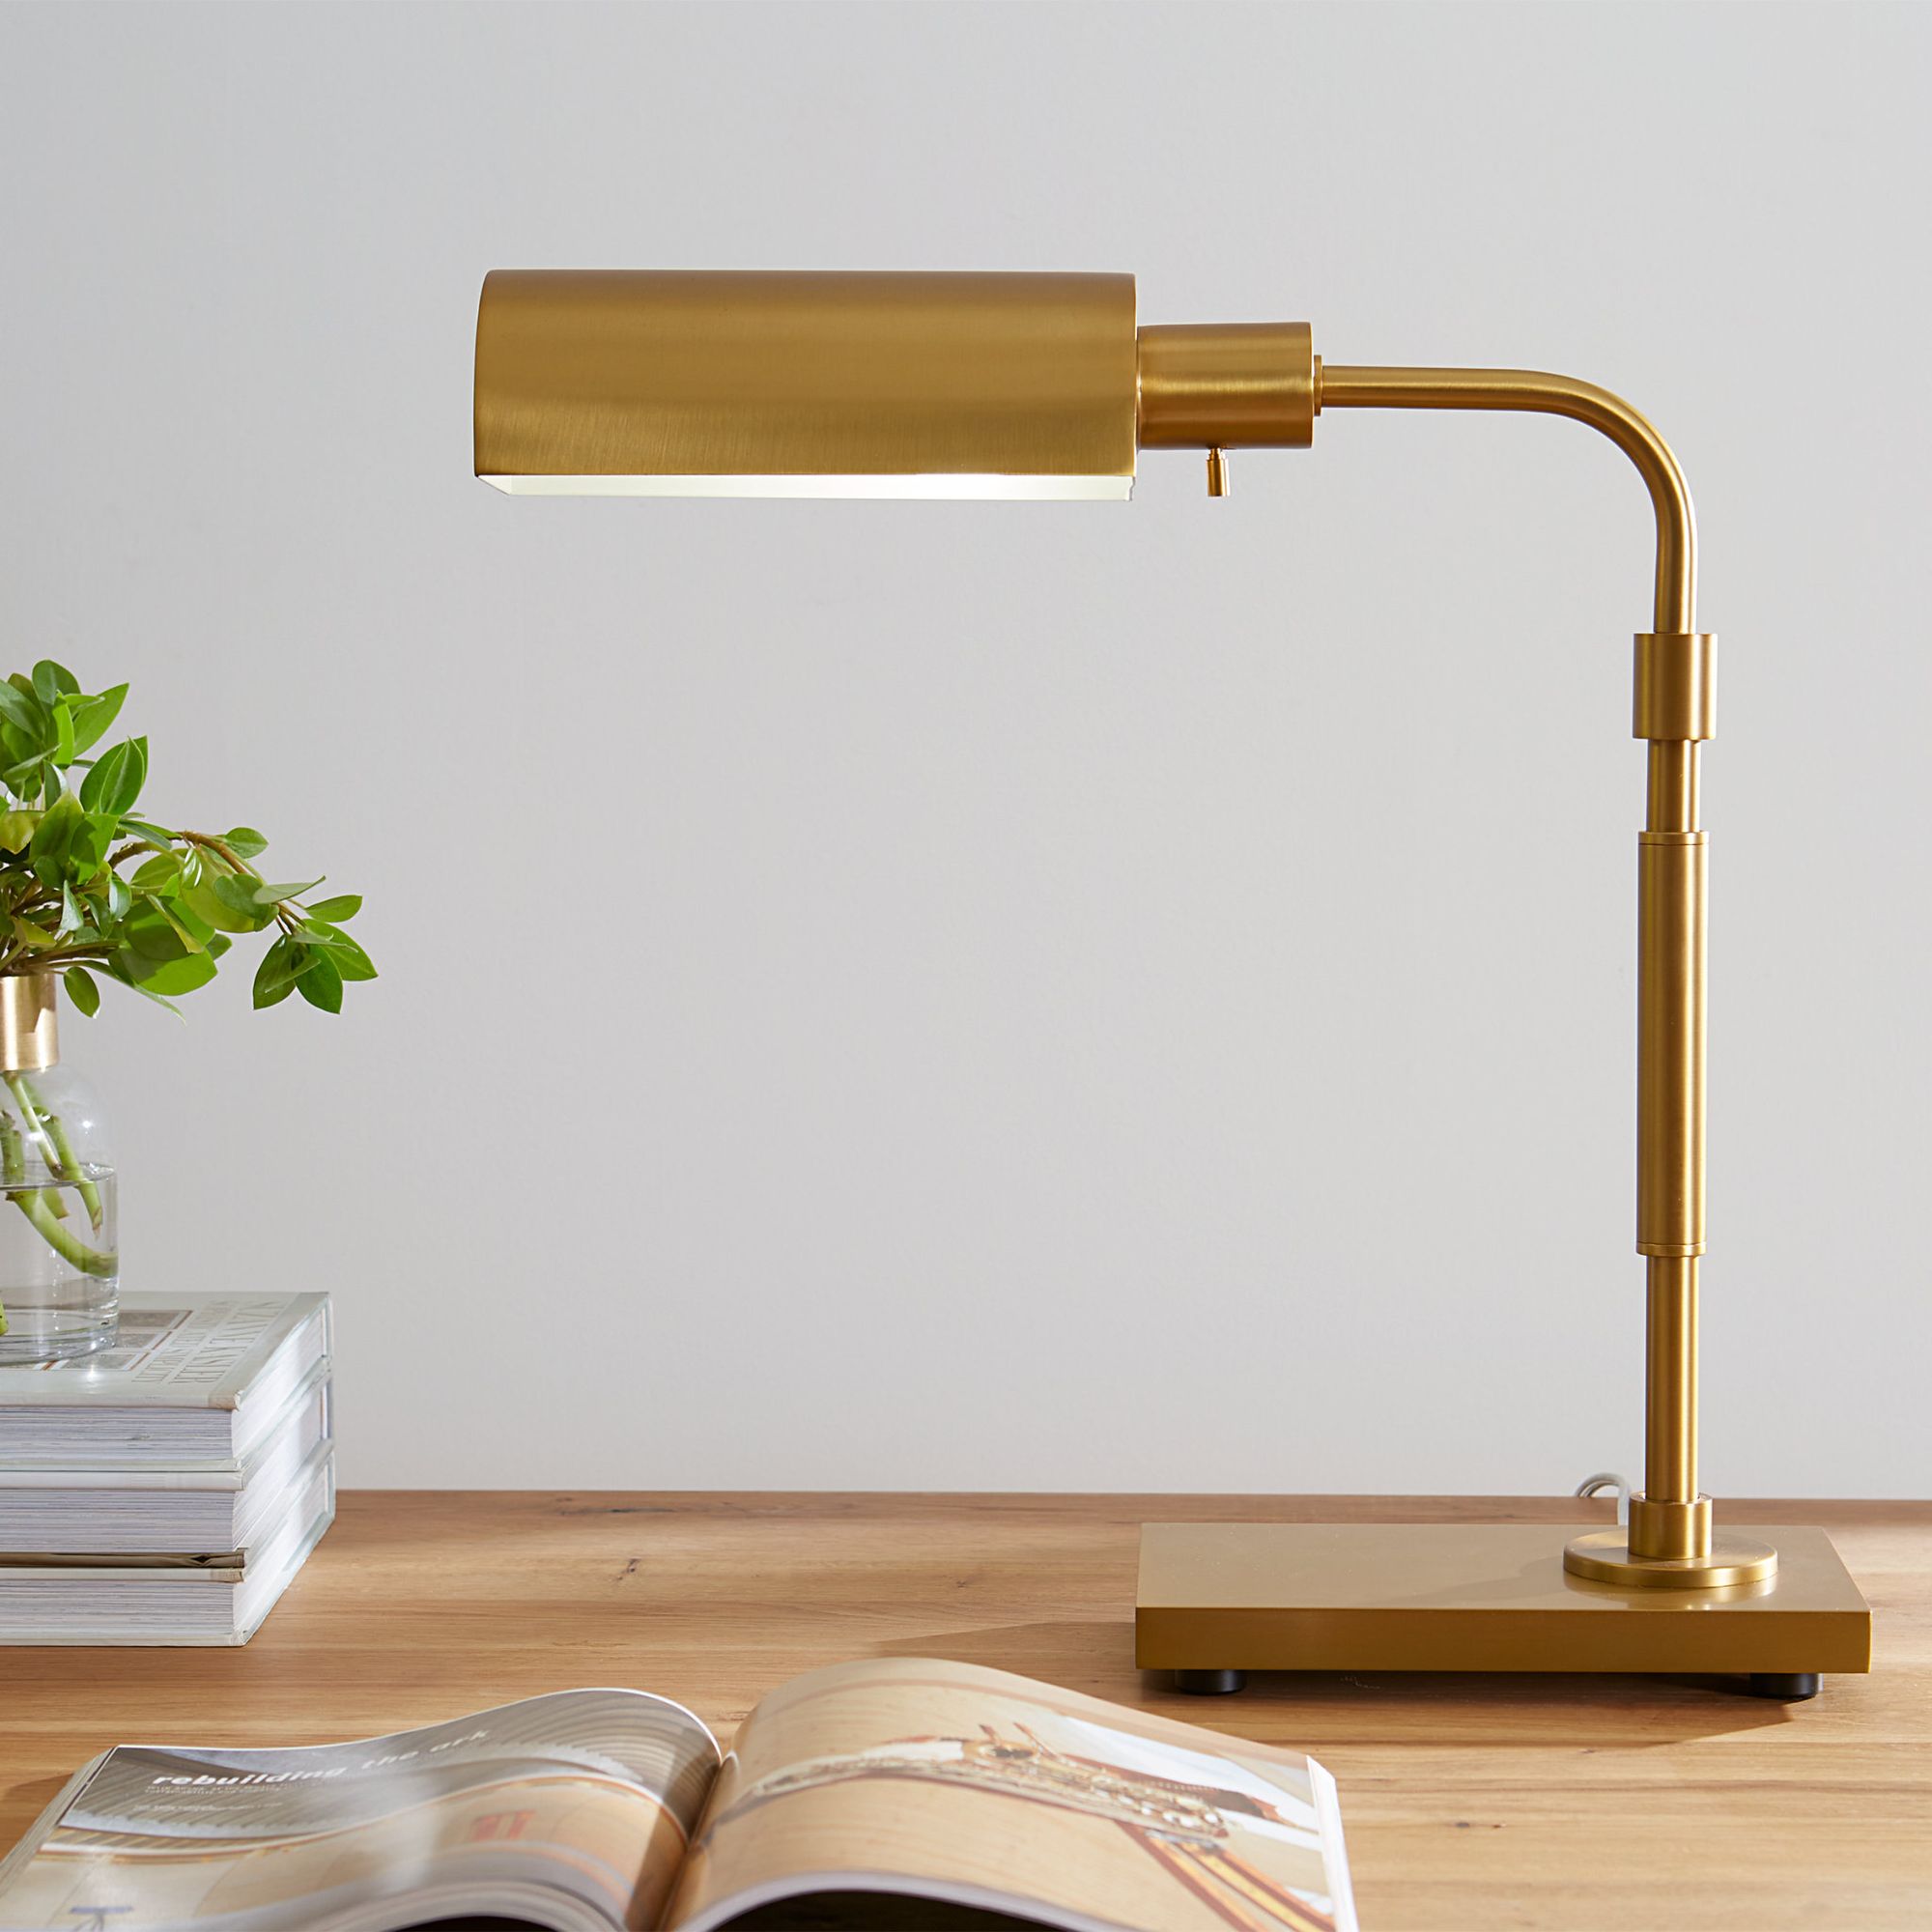 Chapman & Myers Kenyon Task Table Lamp in Burnished Brass